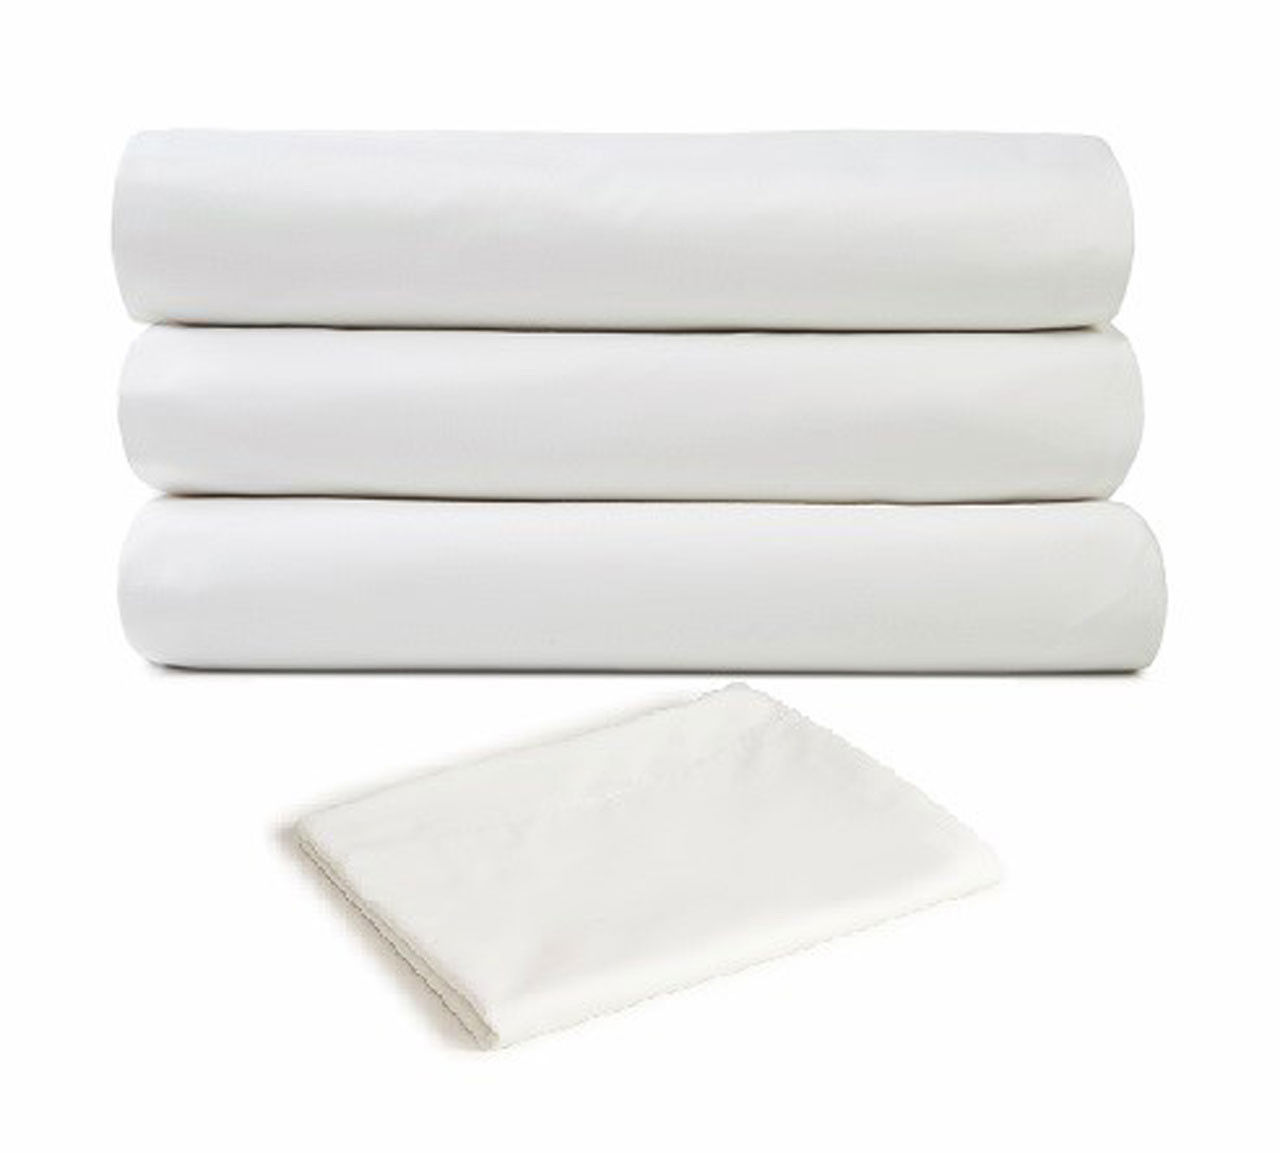 Are cotton poly blend sheets good?